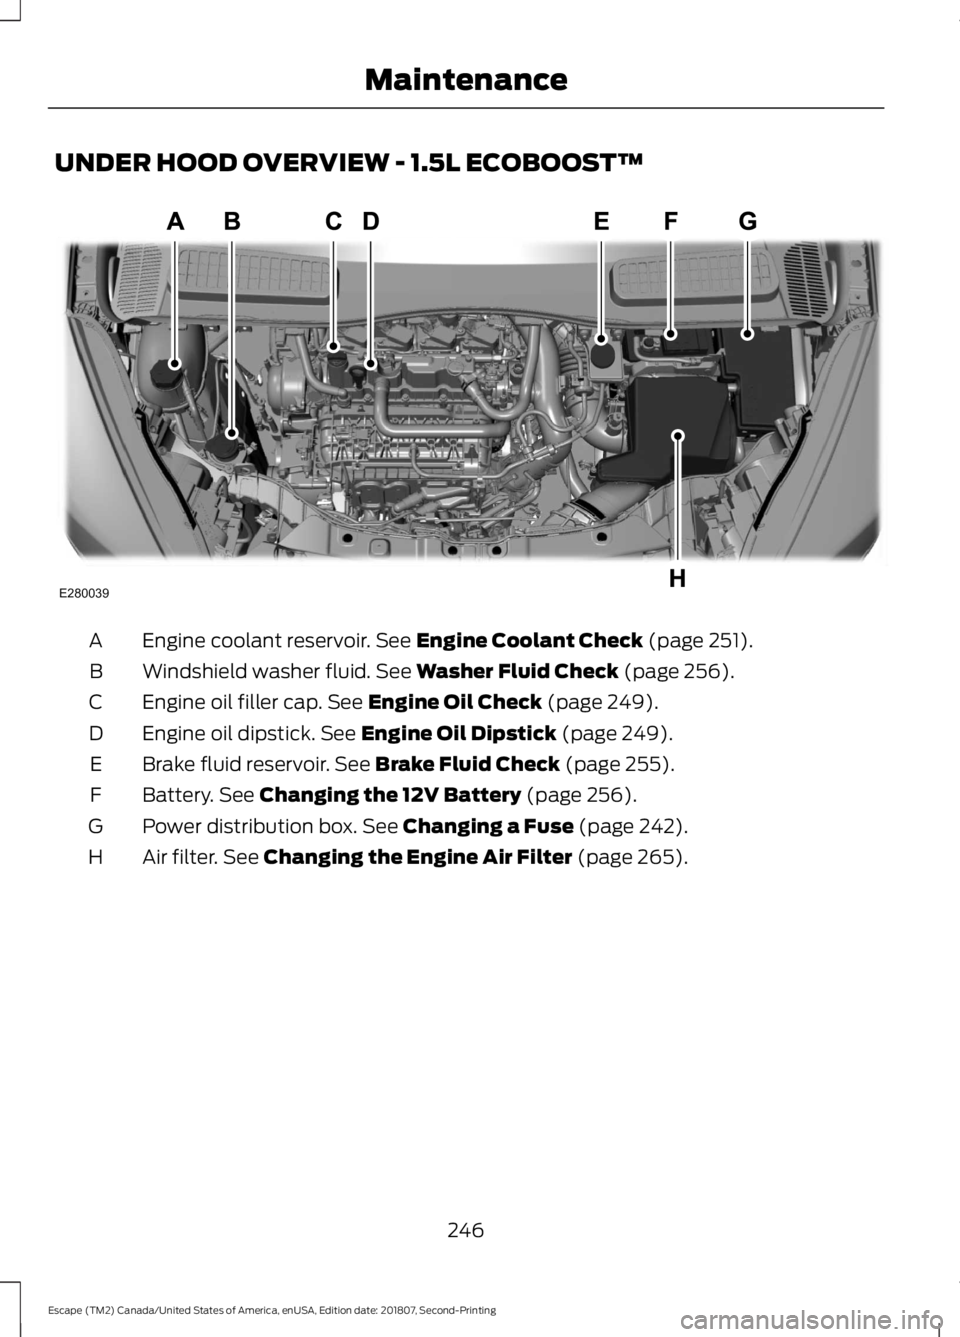 FORD ESCAPE 2019  Owners Manual UNDER HOOD OVERVIEW - 1.5L ECOBOOST™
Engine coolant reservoir. See Engine Coolant Check (page 251).
A
Windshield washer fluid.
 See Washer Fluid Check (page 256).
B
Engine oil filler cap.
 See Engin